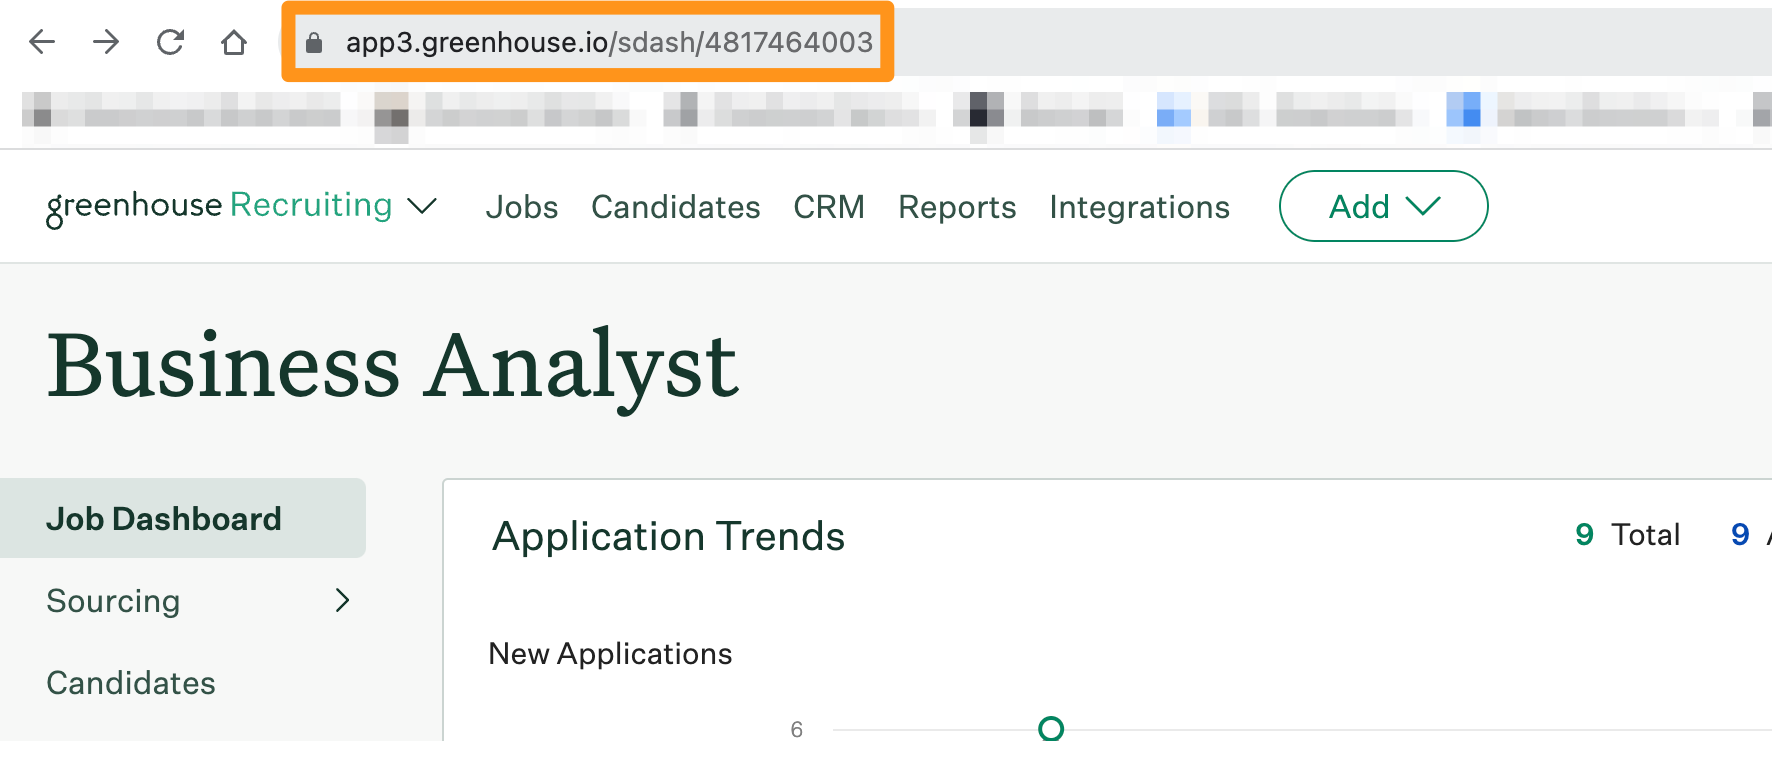 Greenhouse Recruiting job URL highlighted to paste in Ducknowl ATS link field.png